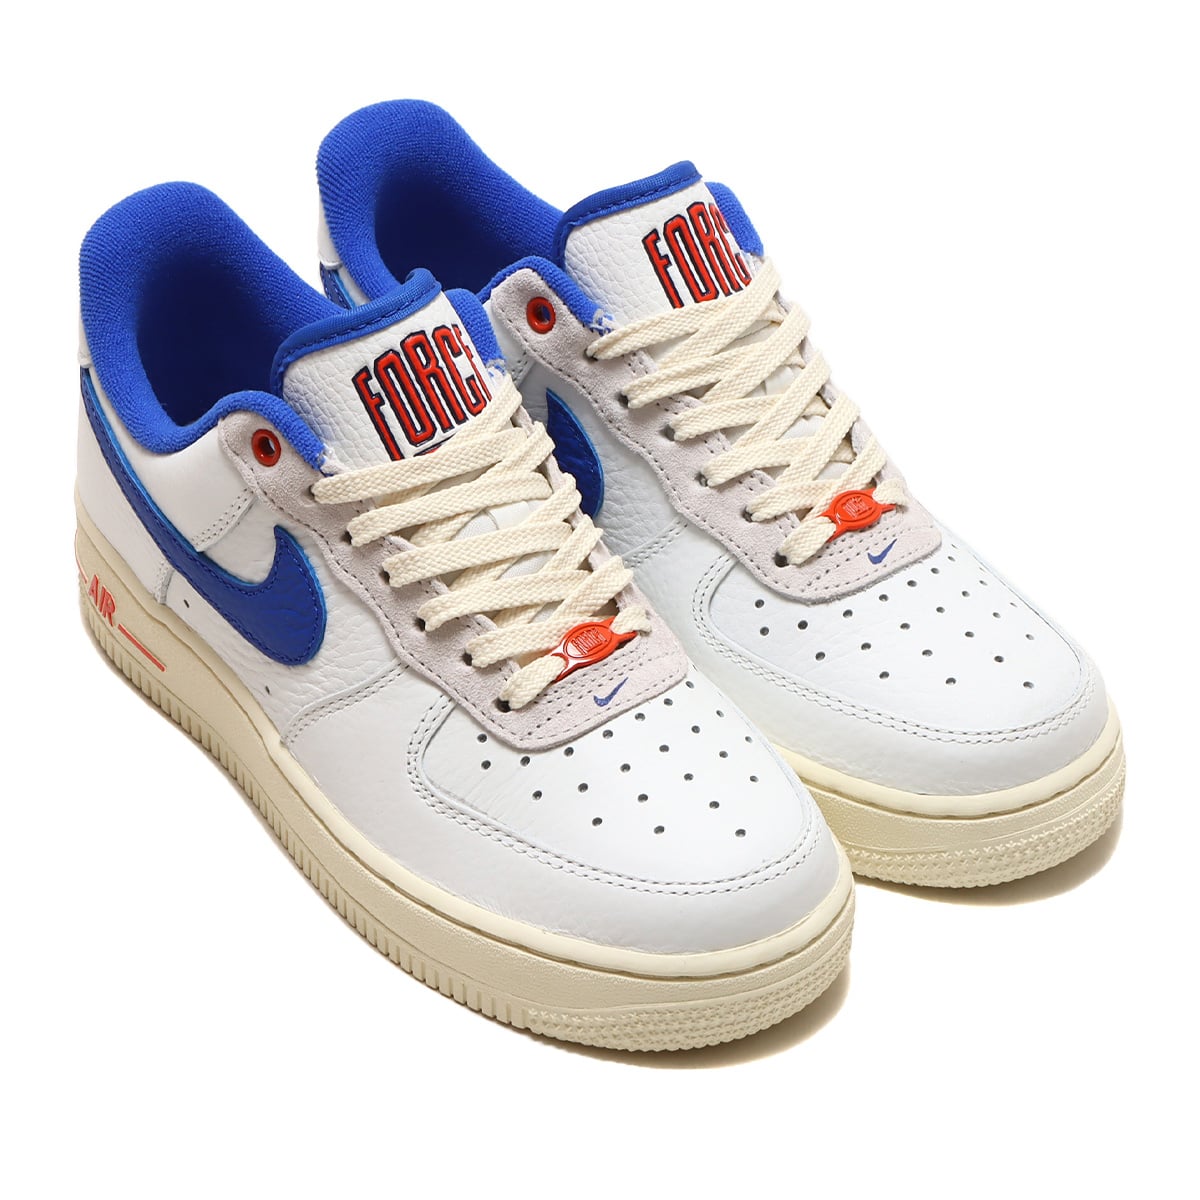 NIKE WMNS AIR FORCE 1 '07 LX SUMMIT WHITE/HYPER ROYAL-PICANTE RED 23SP-I_photo_large